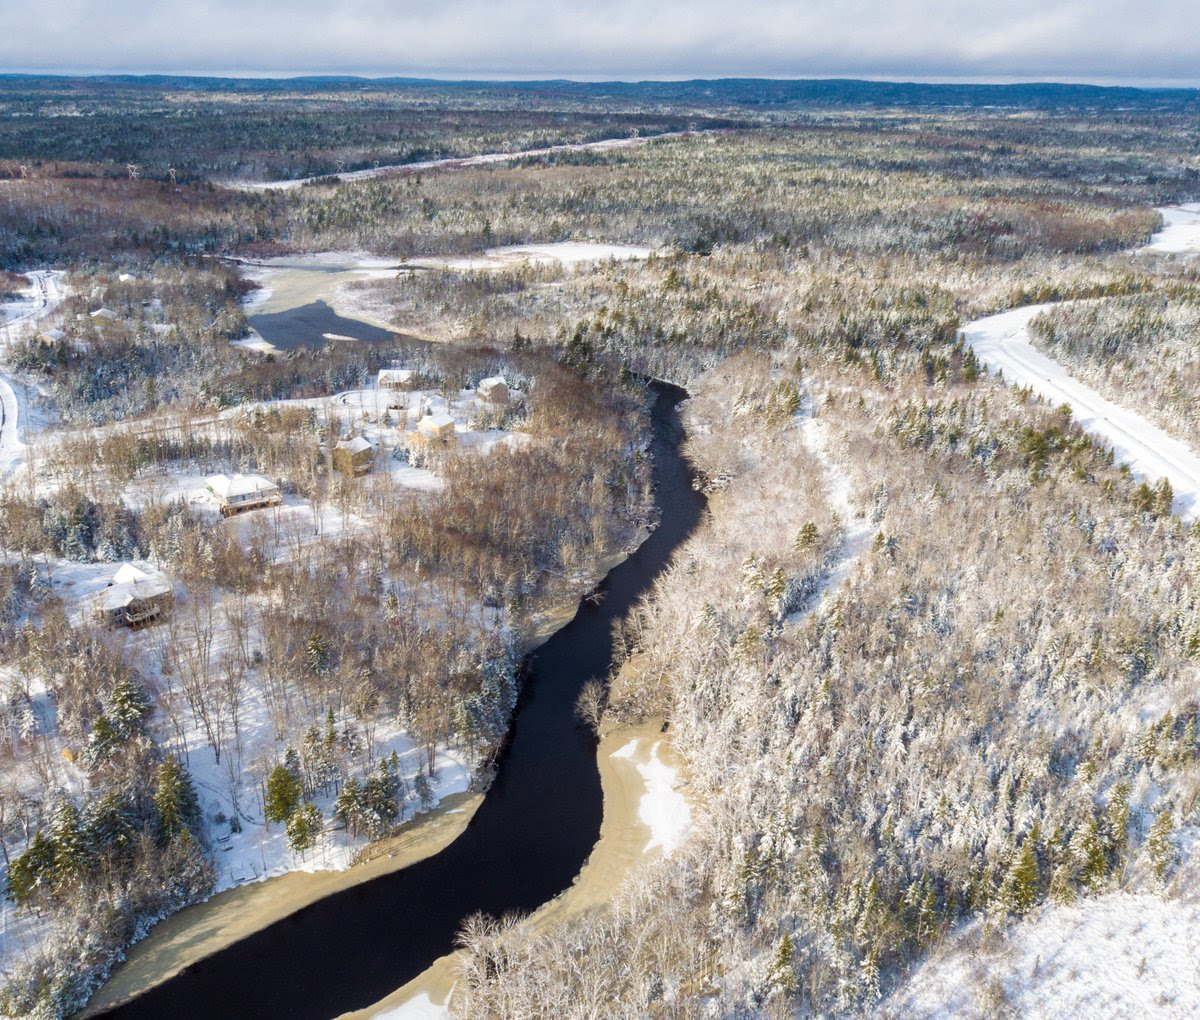 A few more wintery aerials of McCabe Lake area from @flitelab 